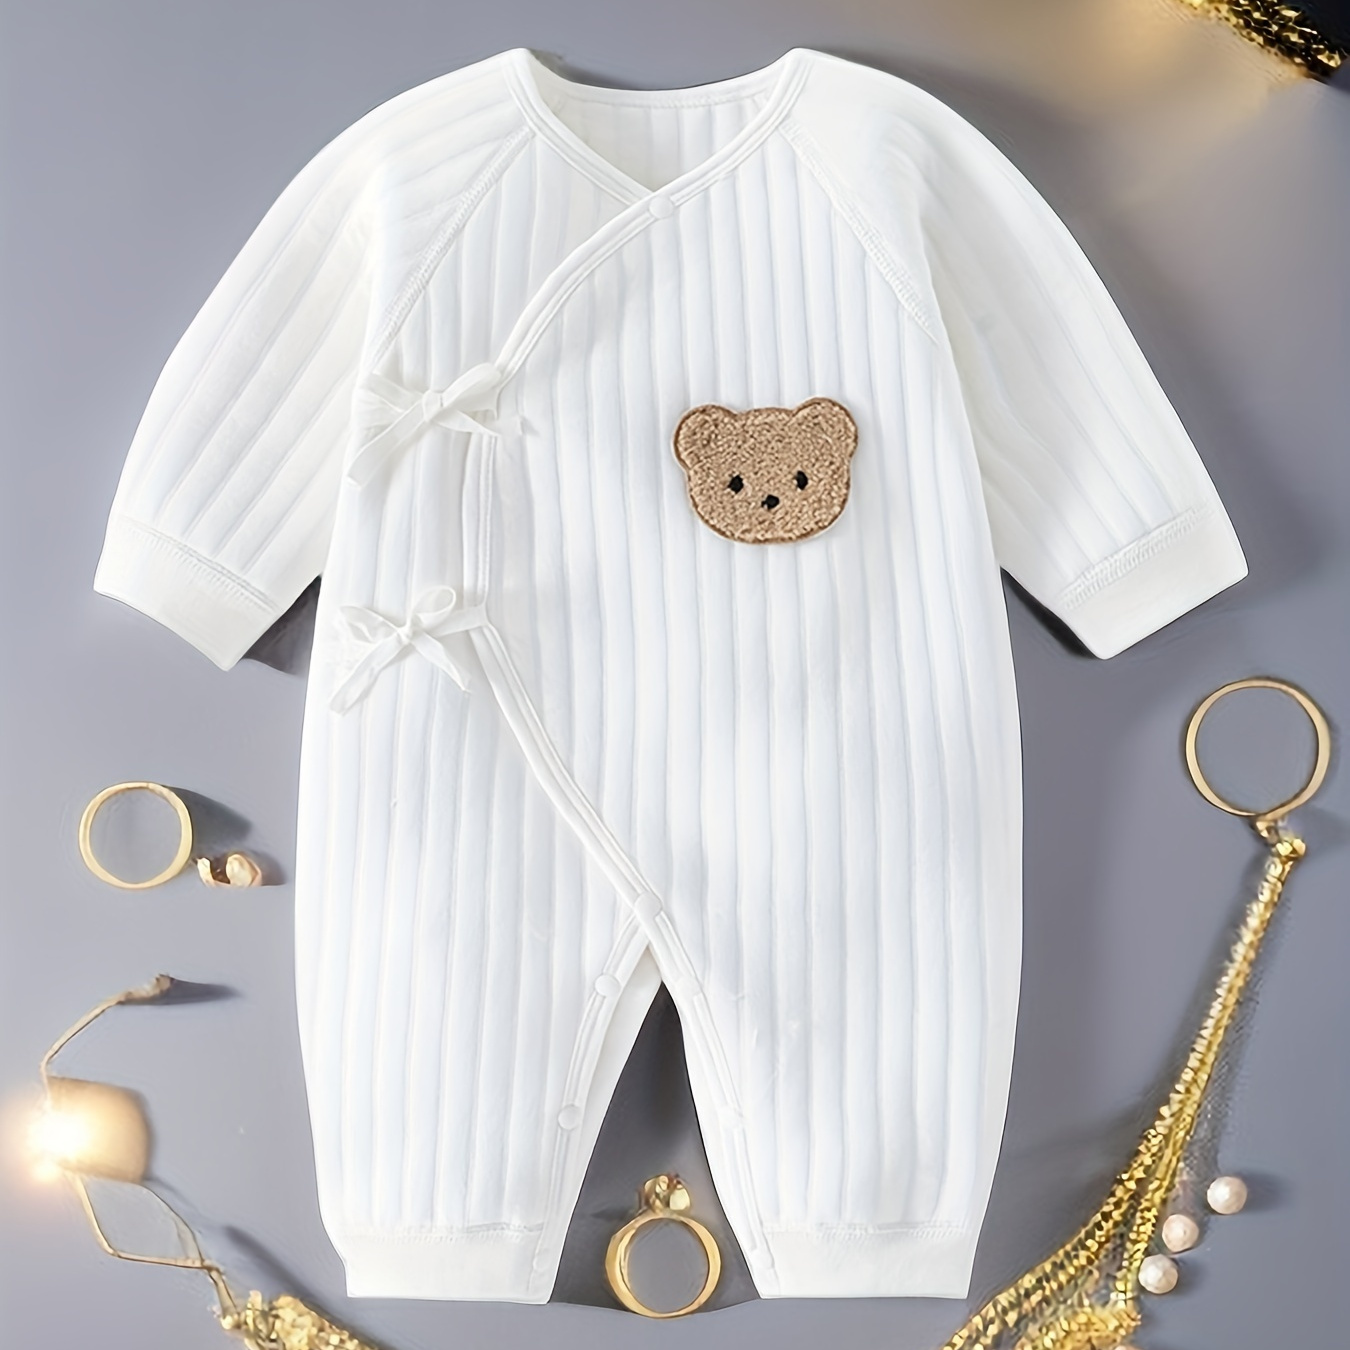 

Newborn Baby's Breathable Comfy Cotton Bodysuit, Cute Bear Patched Casual Long Sleeve Onesie, Toddler & Infant Girl's Clothing